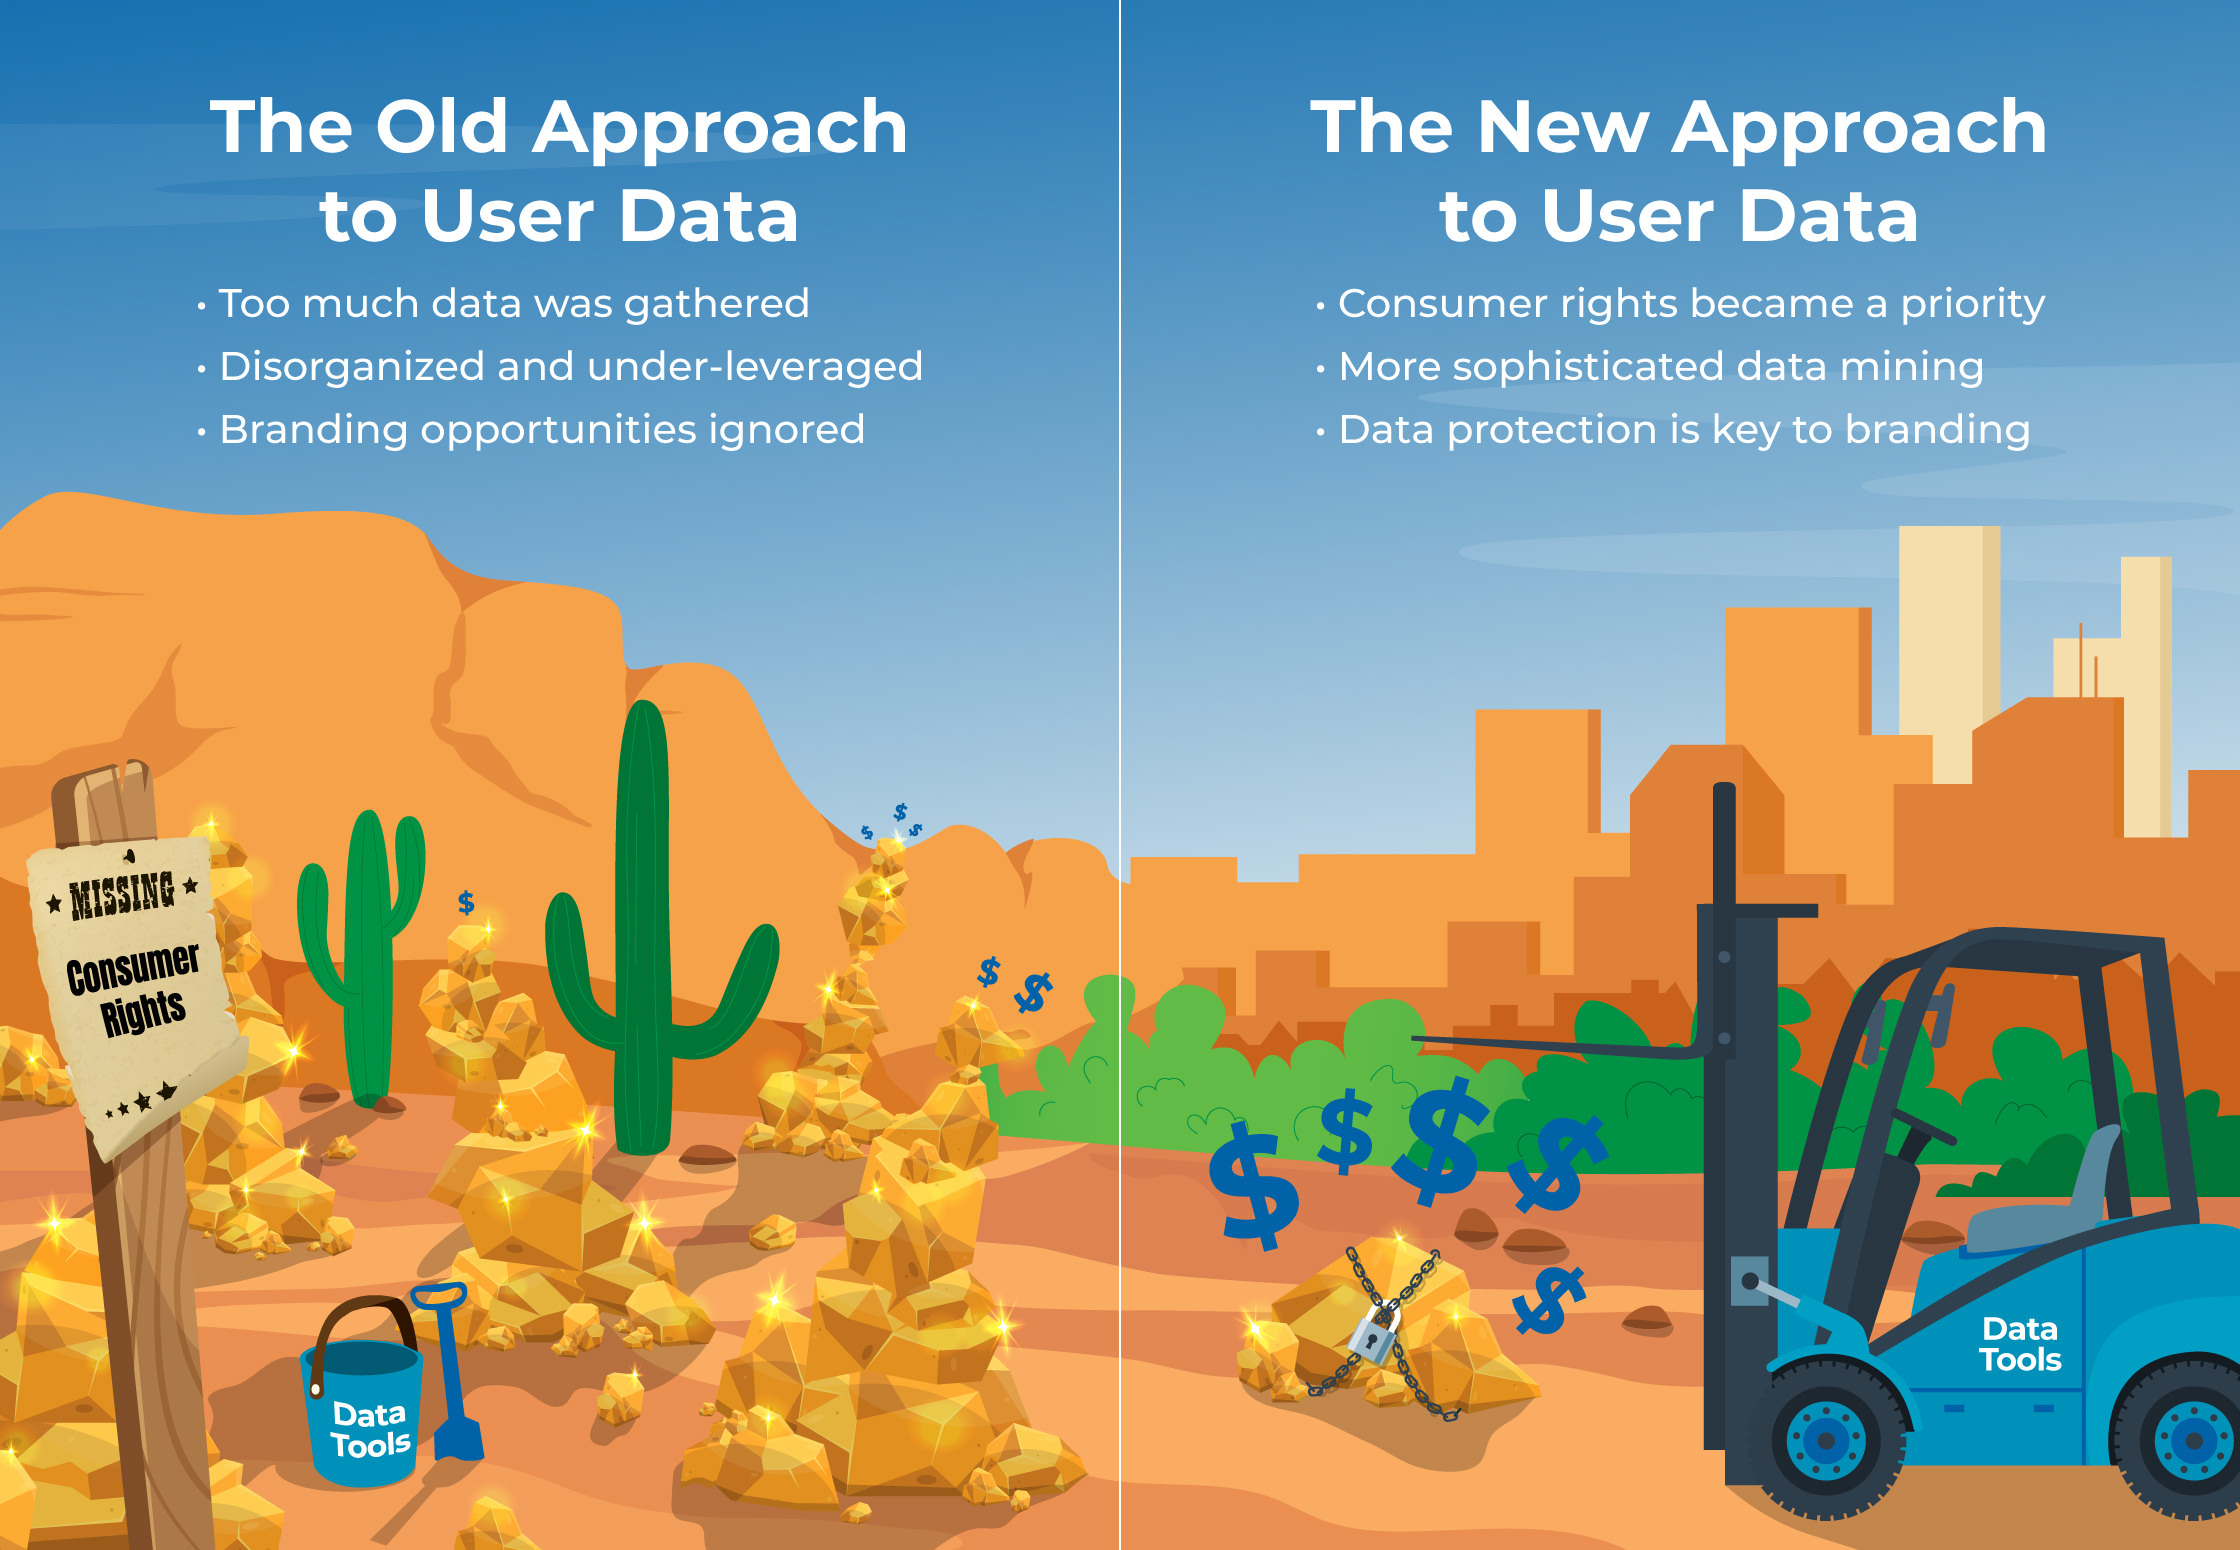 The old approach vs. the new approach to user data